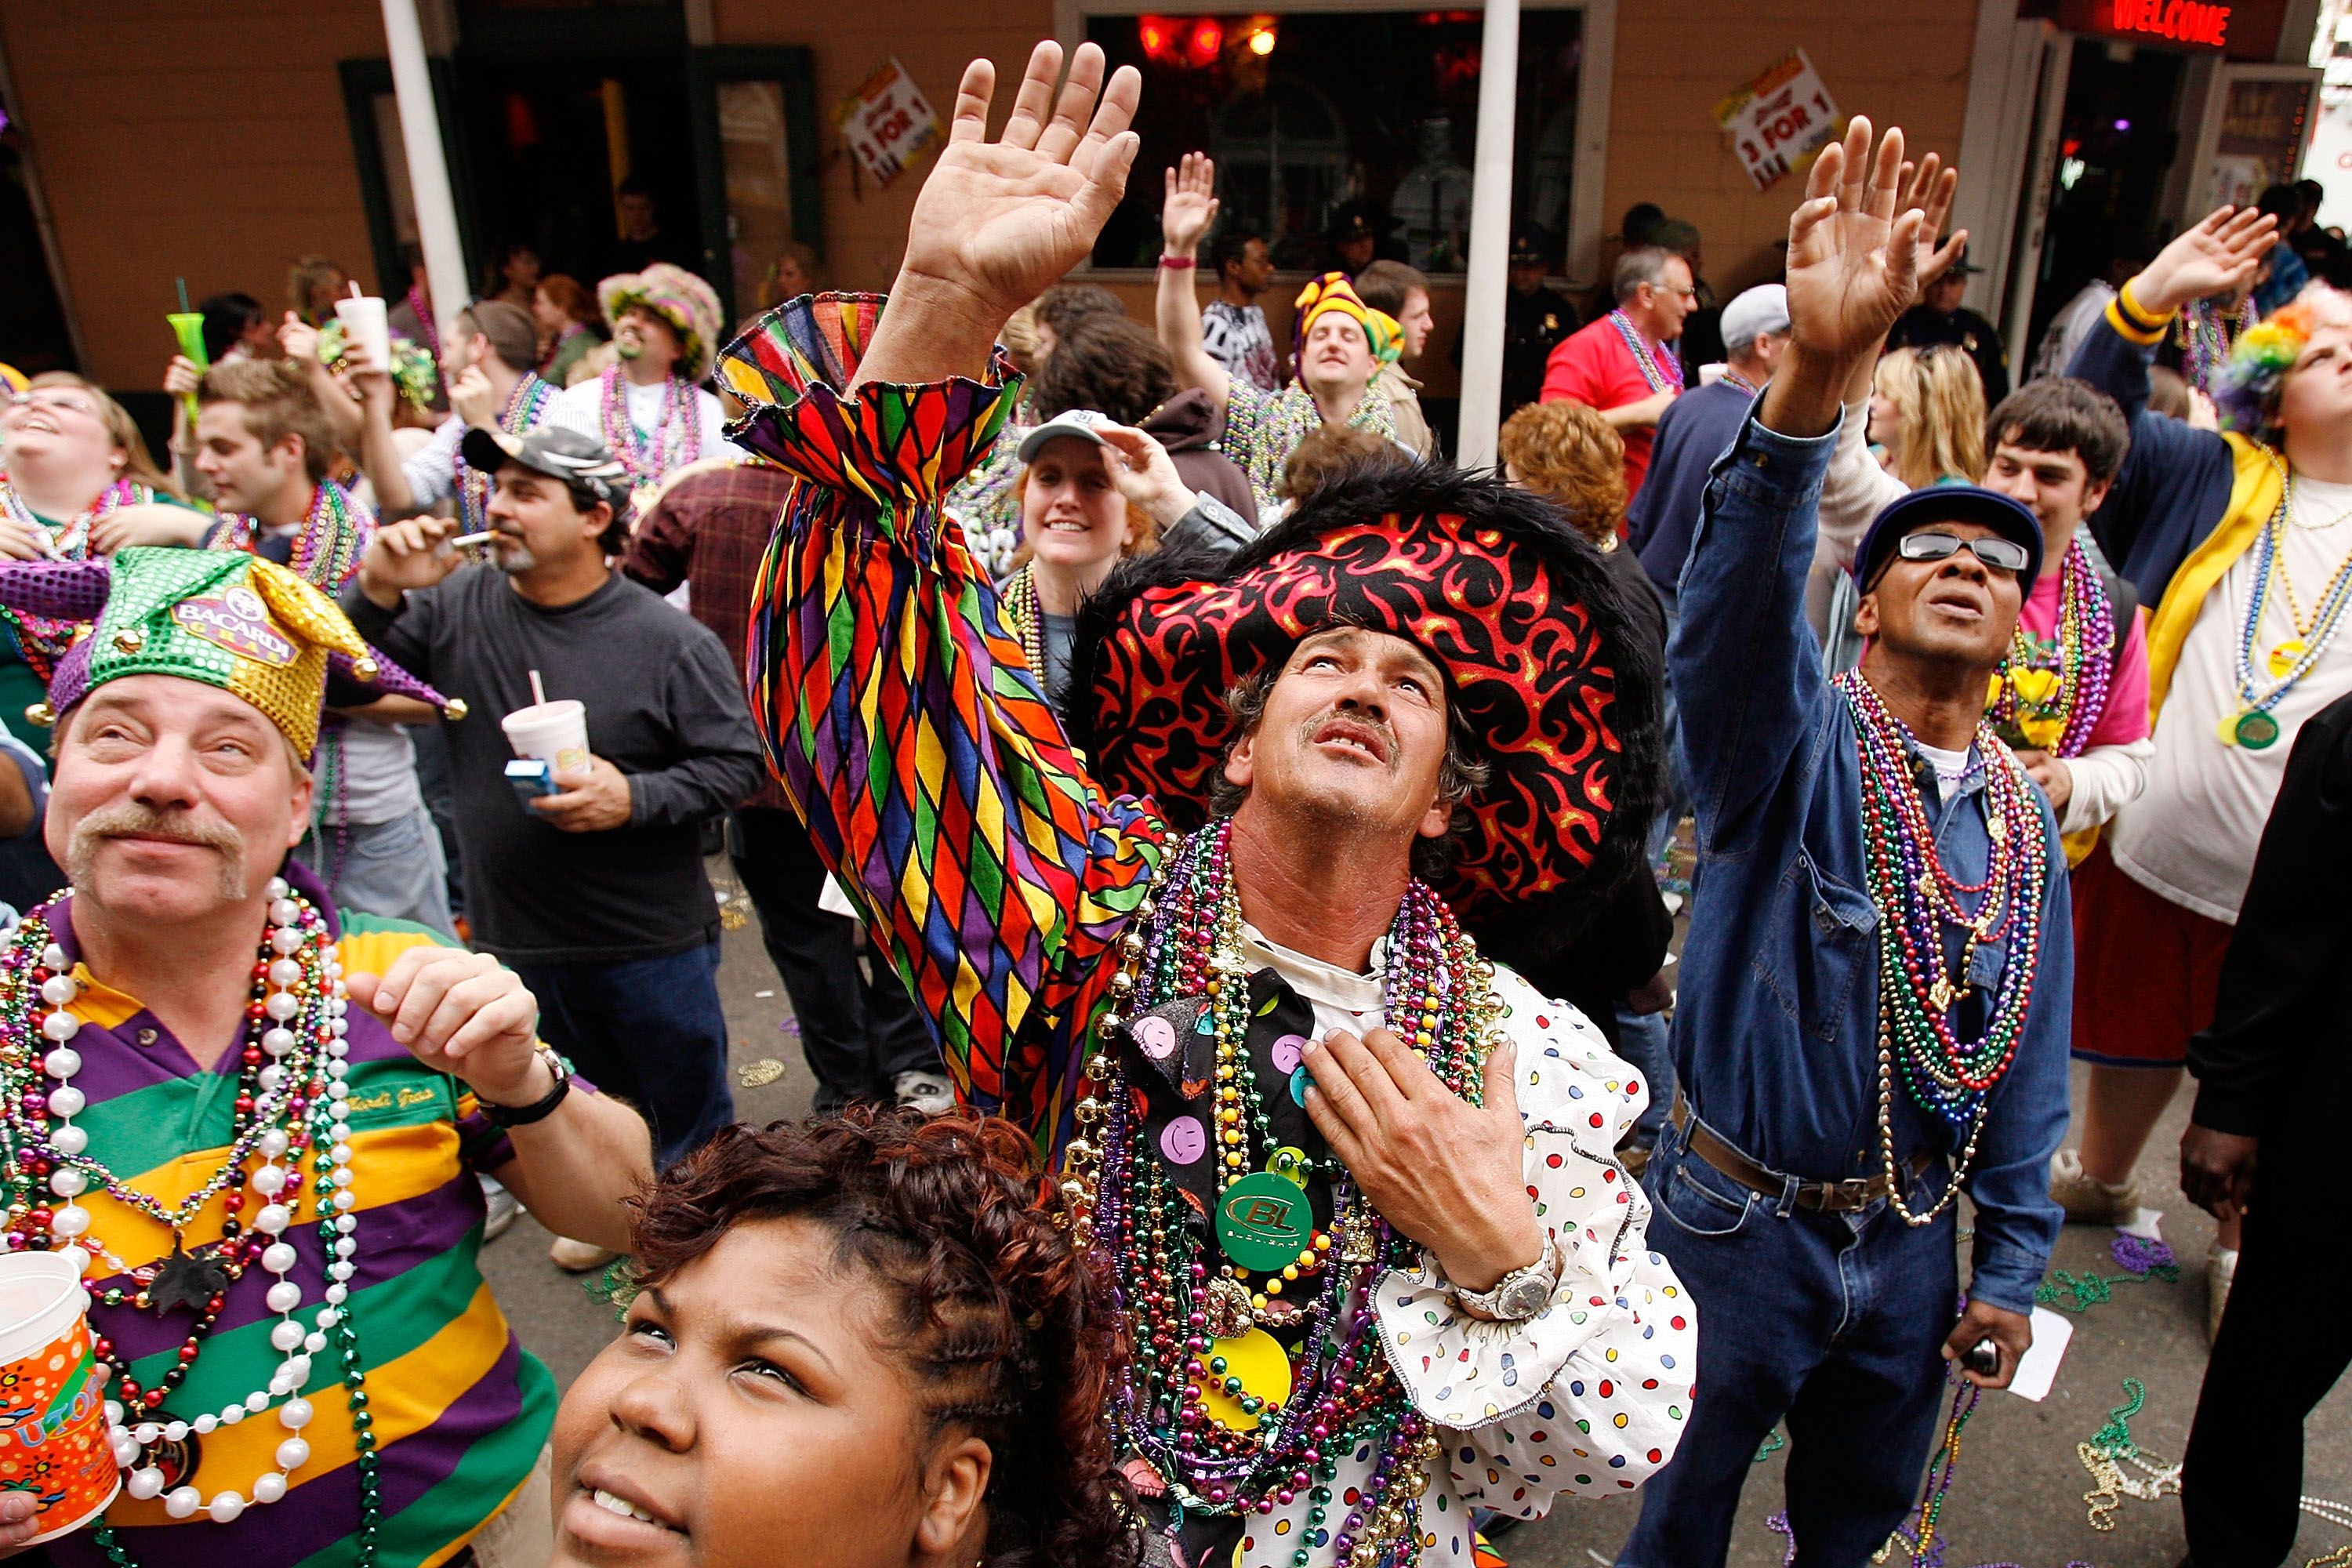 The Reason Why We Throw Beads at Mardi Gras